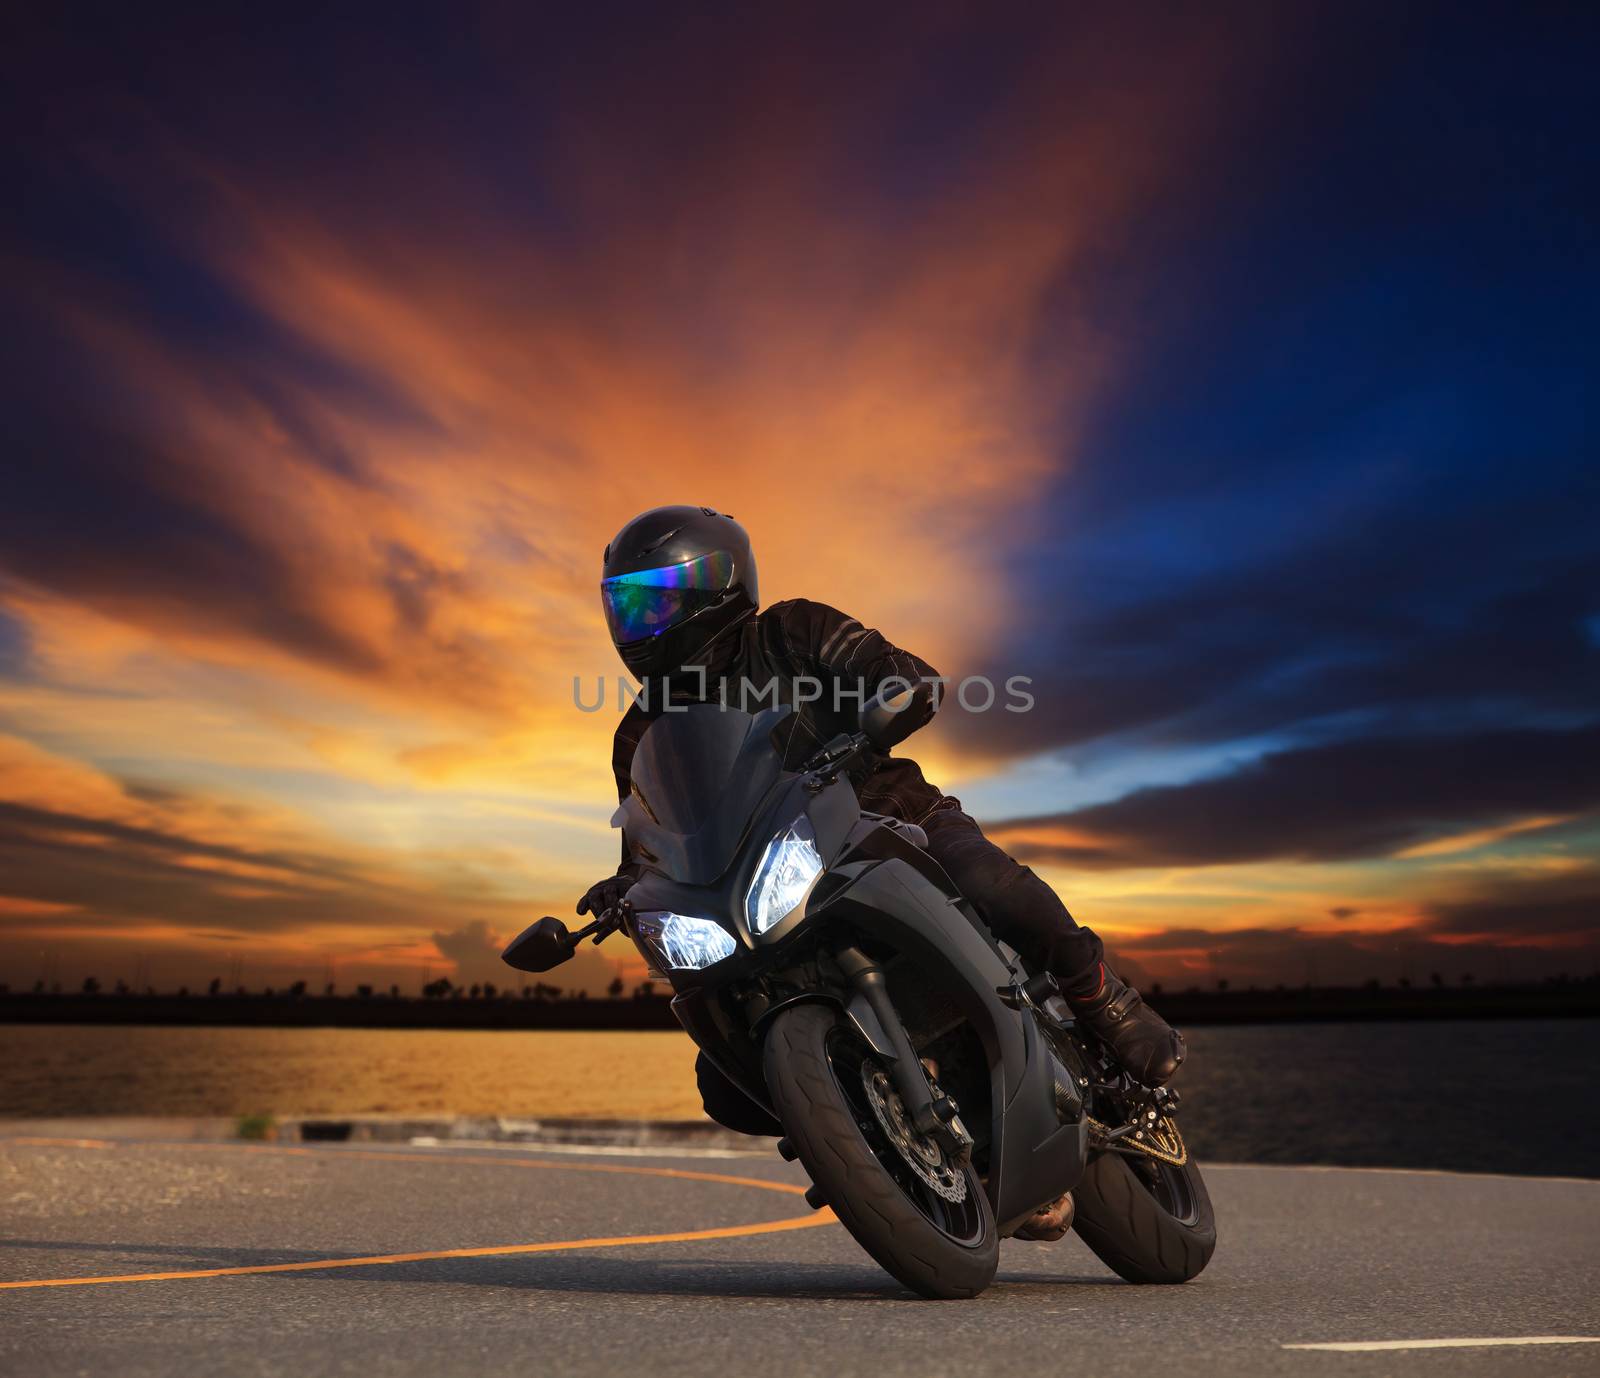 young man riding big bike motorcycle leaning curve on asphalt highways road against beautiful dusky sky use as people adventure sport leisure theme